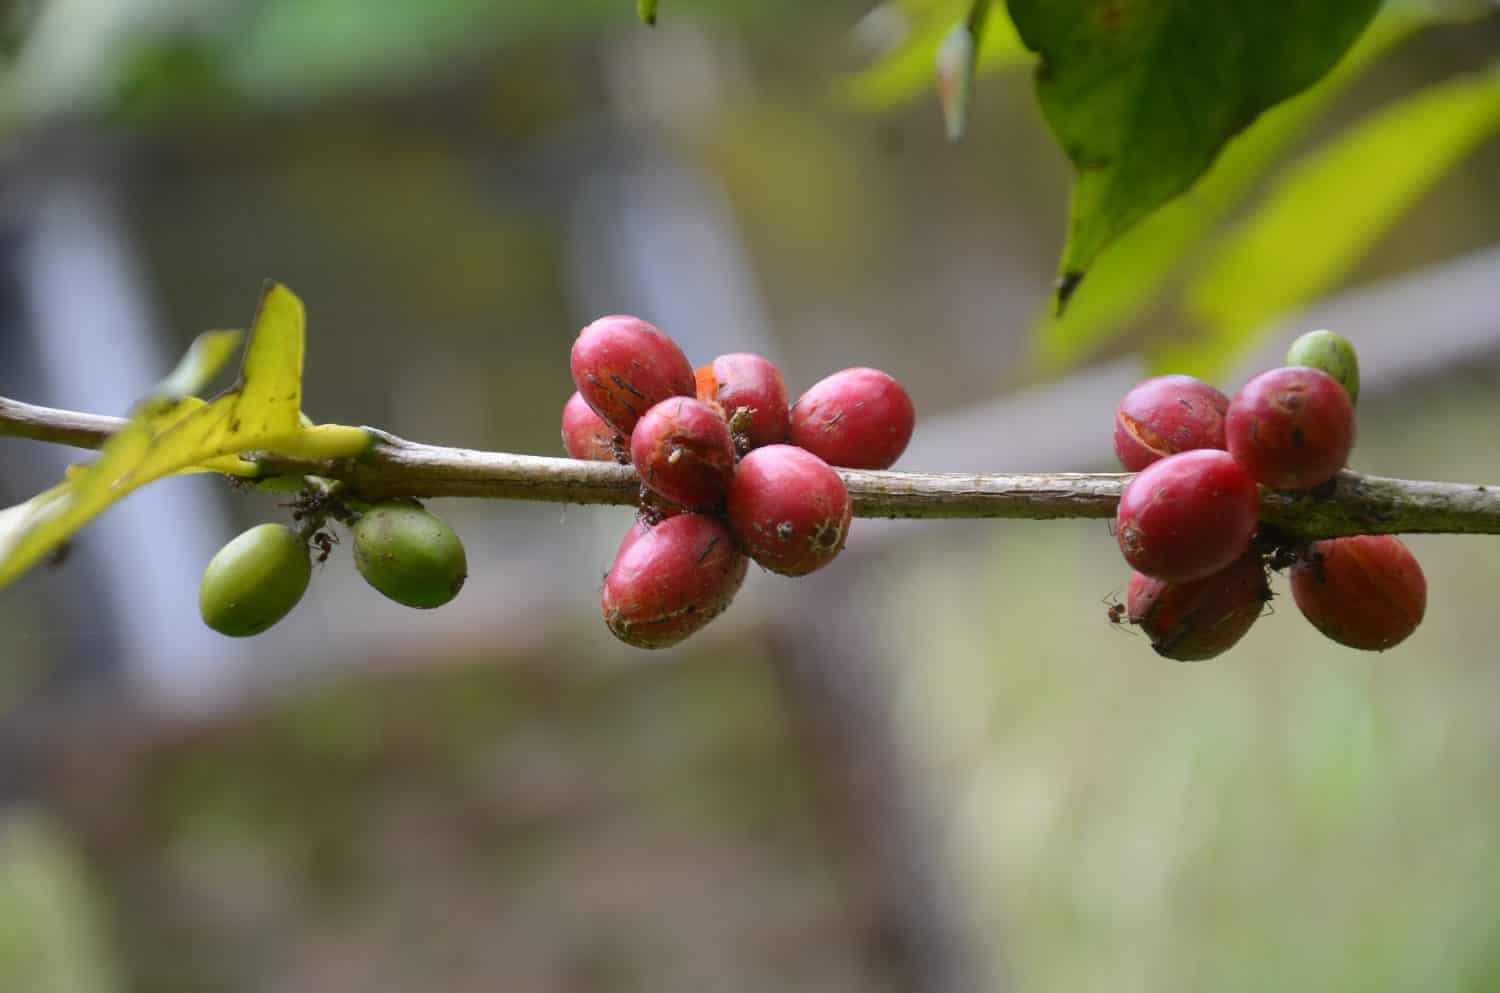 Coffee (Coffea spp) is a tree-shaped plant species belonging to the Rubiaceae family and the Coffea genus. Naturally, coffee plants have tap roots so they don't fall over easily